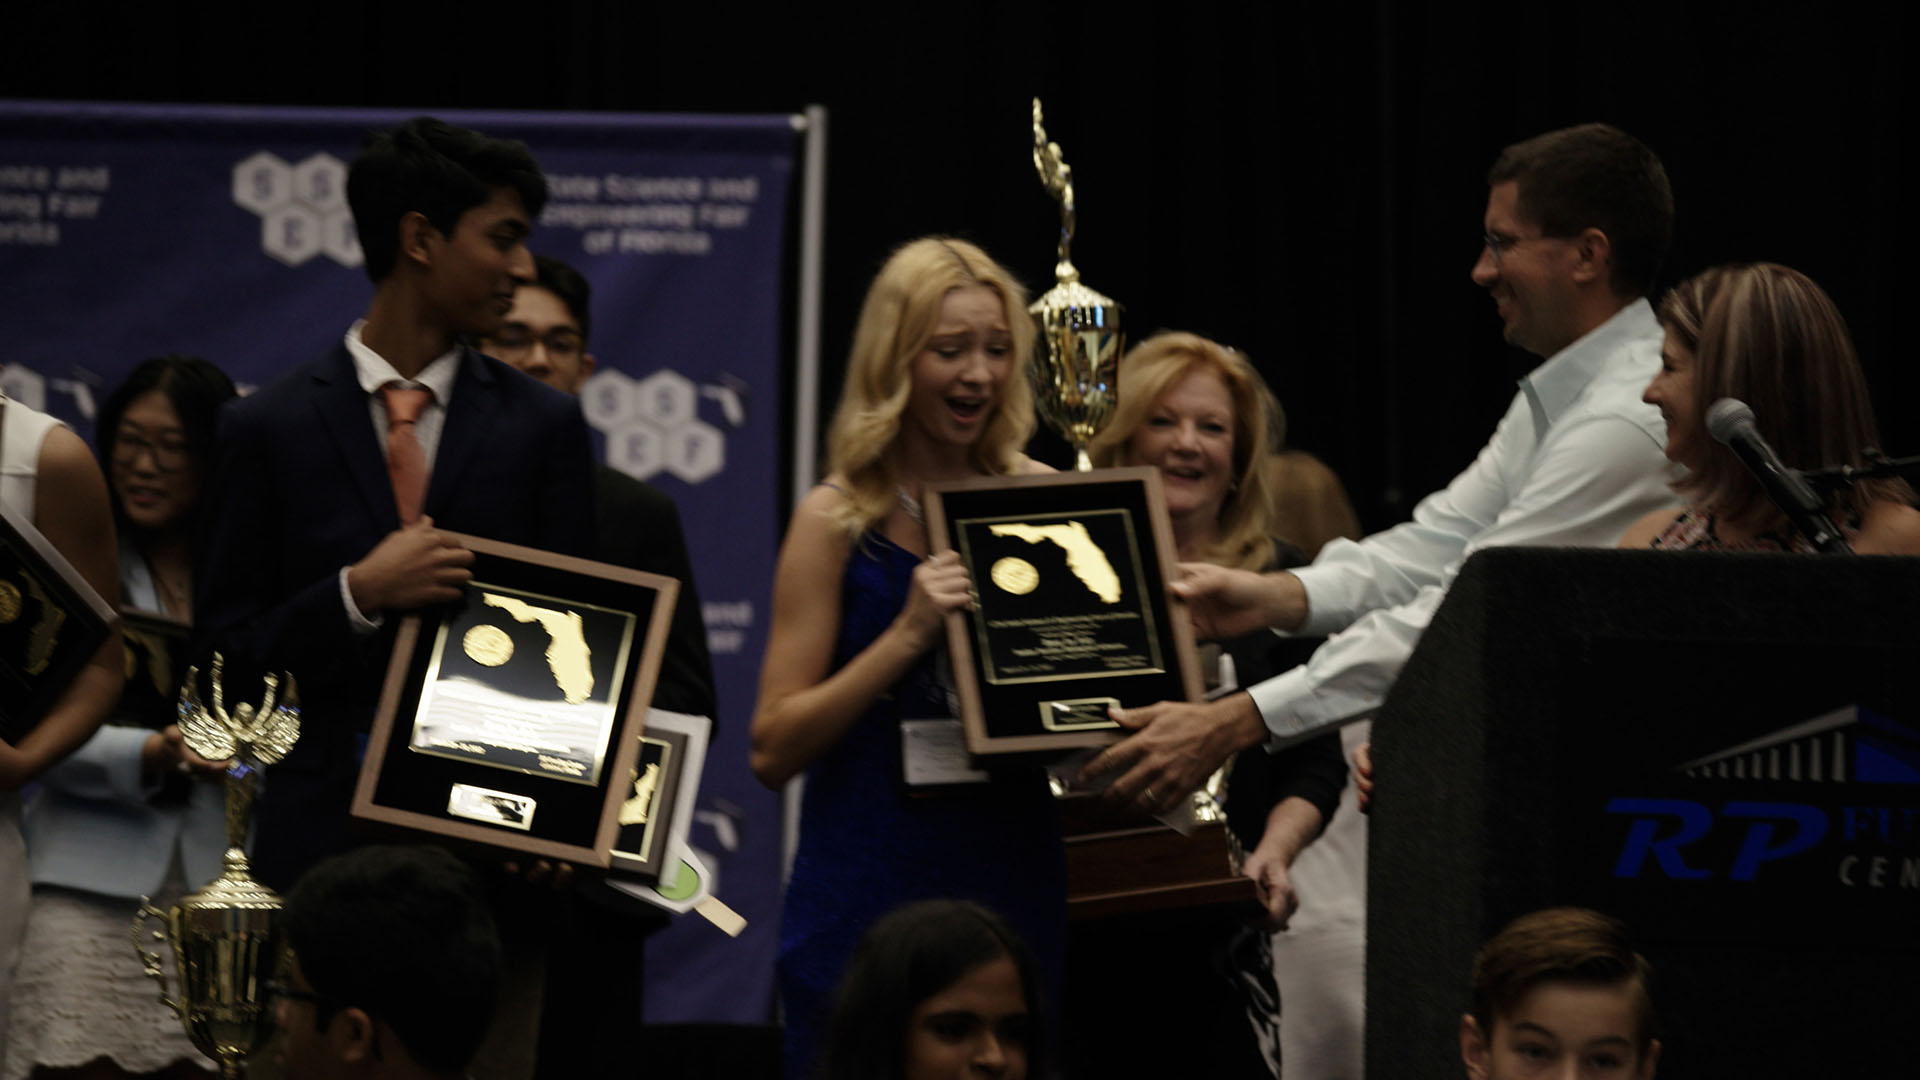 Erin Gaydar receives a plaque at the Science and Engineering Fair of Florida in Lakeland, Fla. ... [Photo of the day - January 2024]